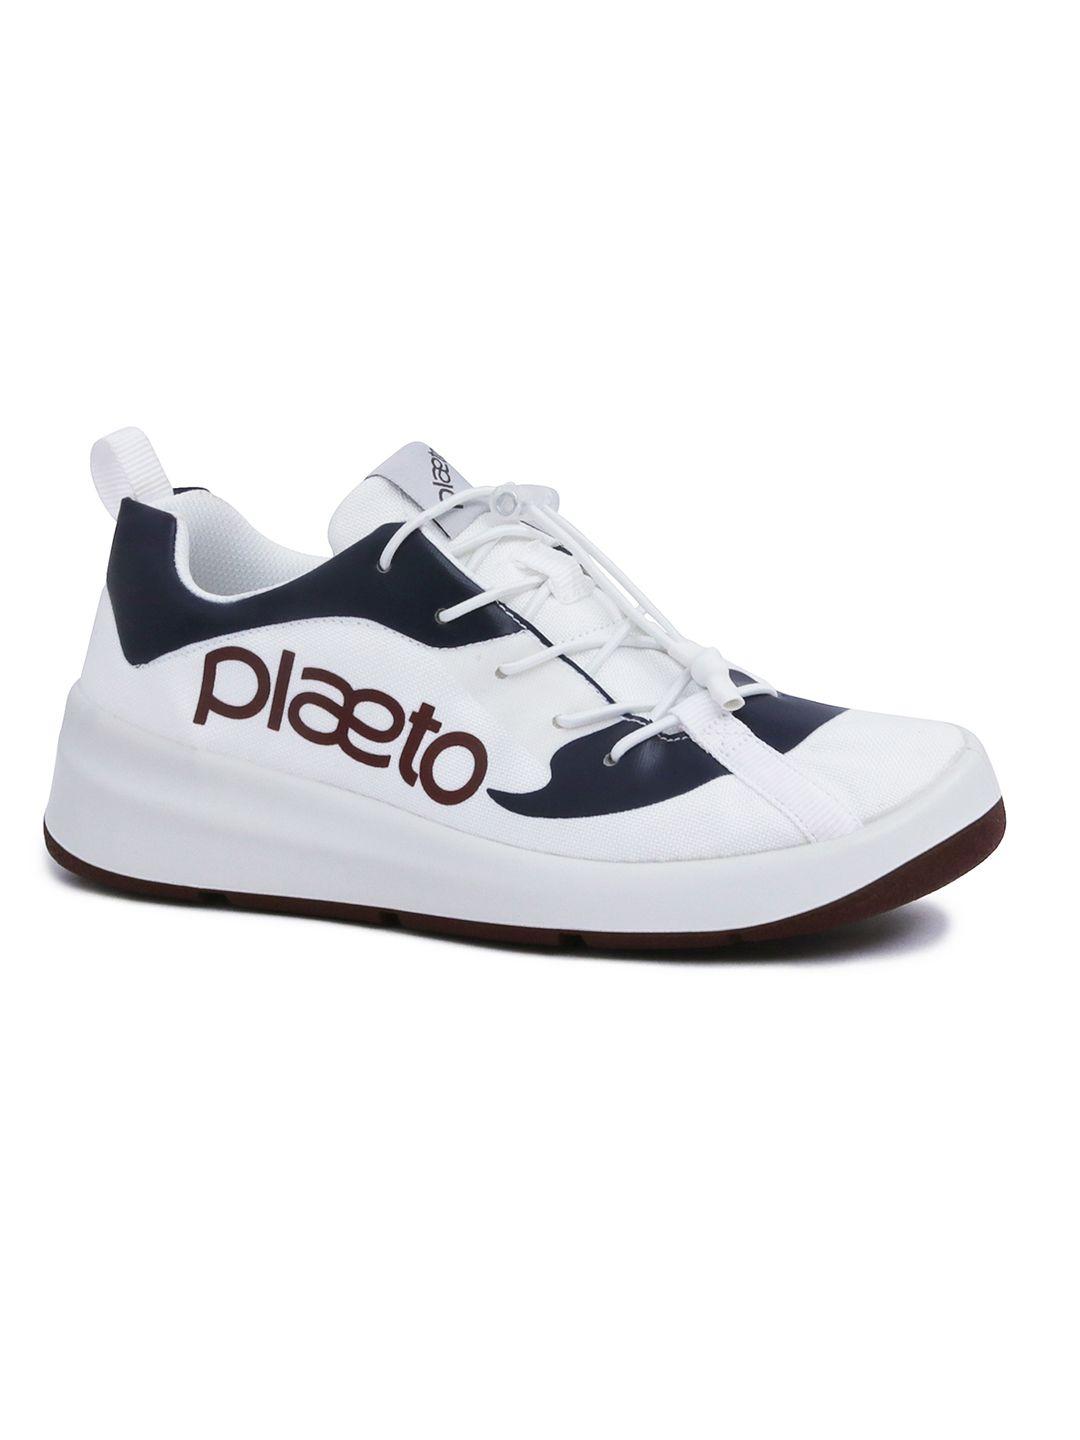 plaeto kids hurricane non-marking multiplay sports shoes